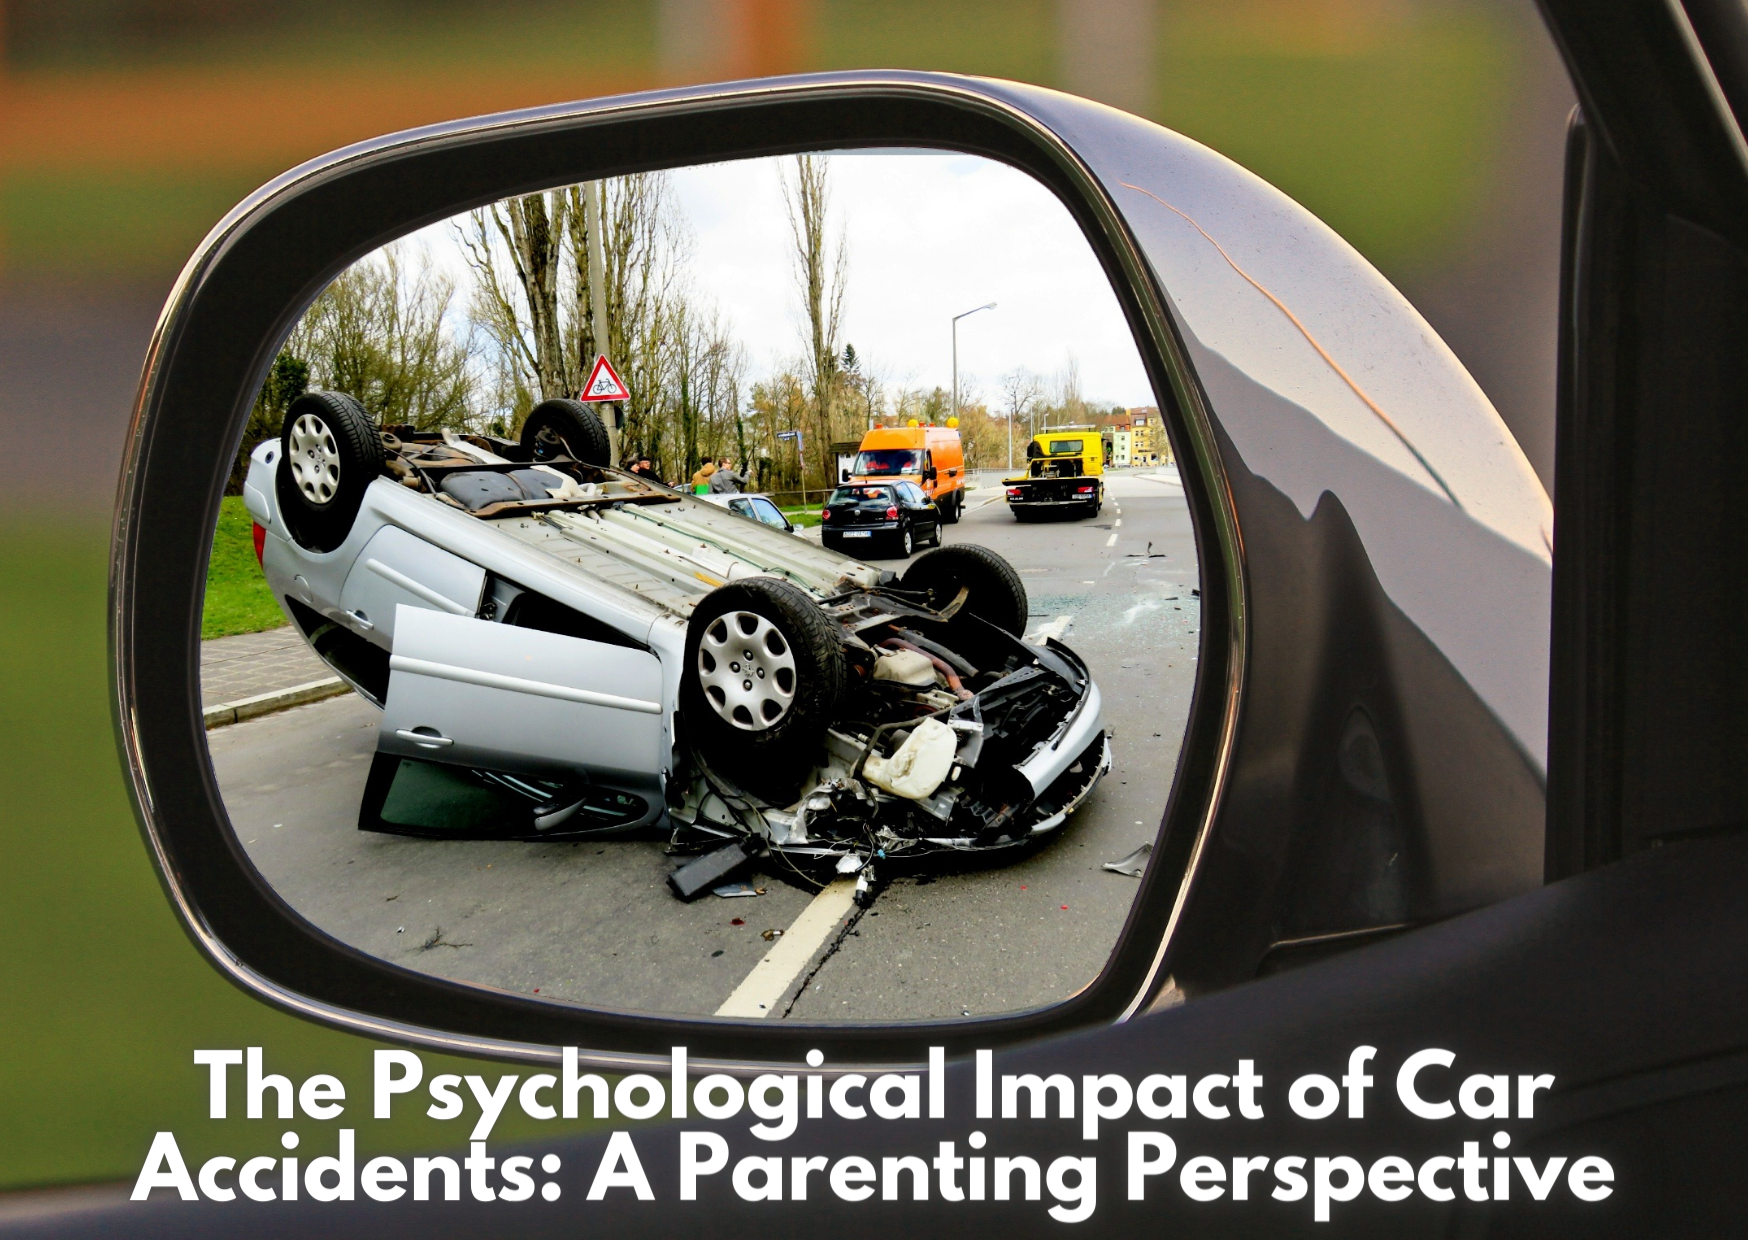 The Psychological Impact of Car Accidents: A Parenting Perspective